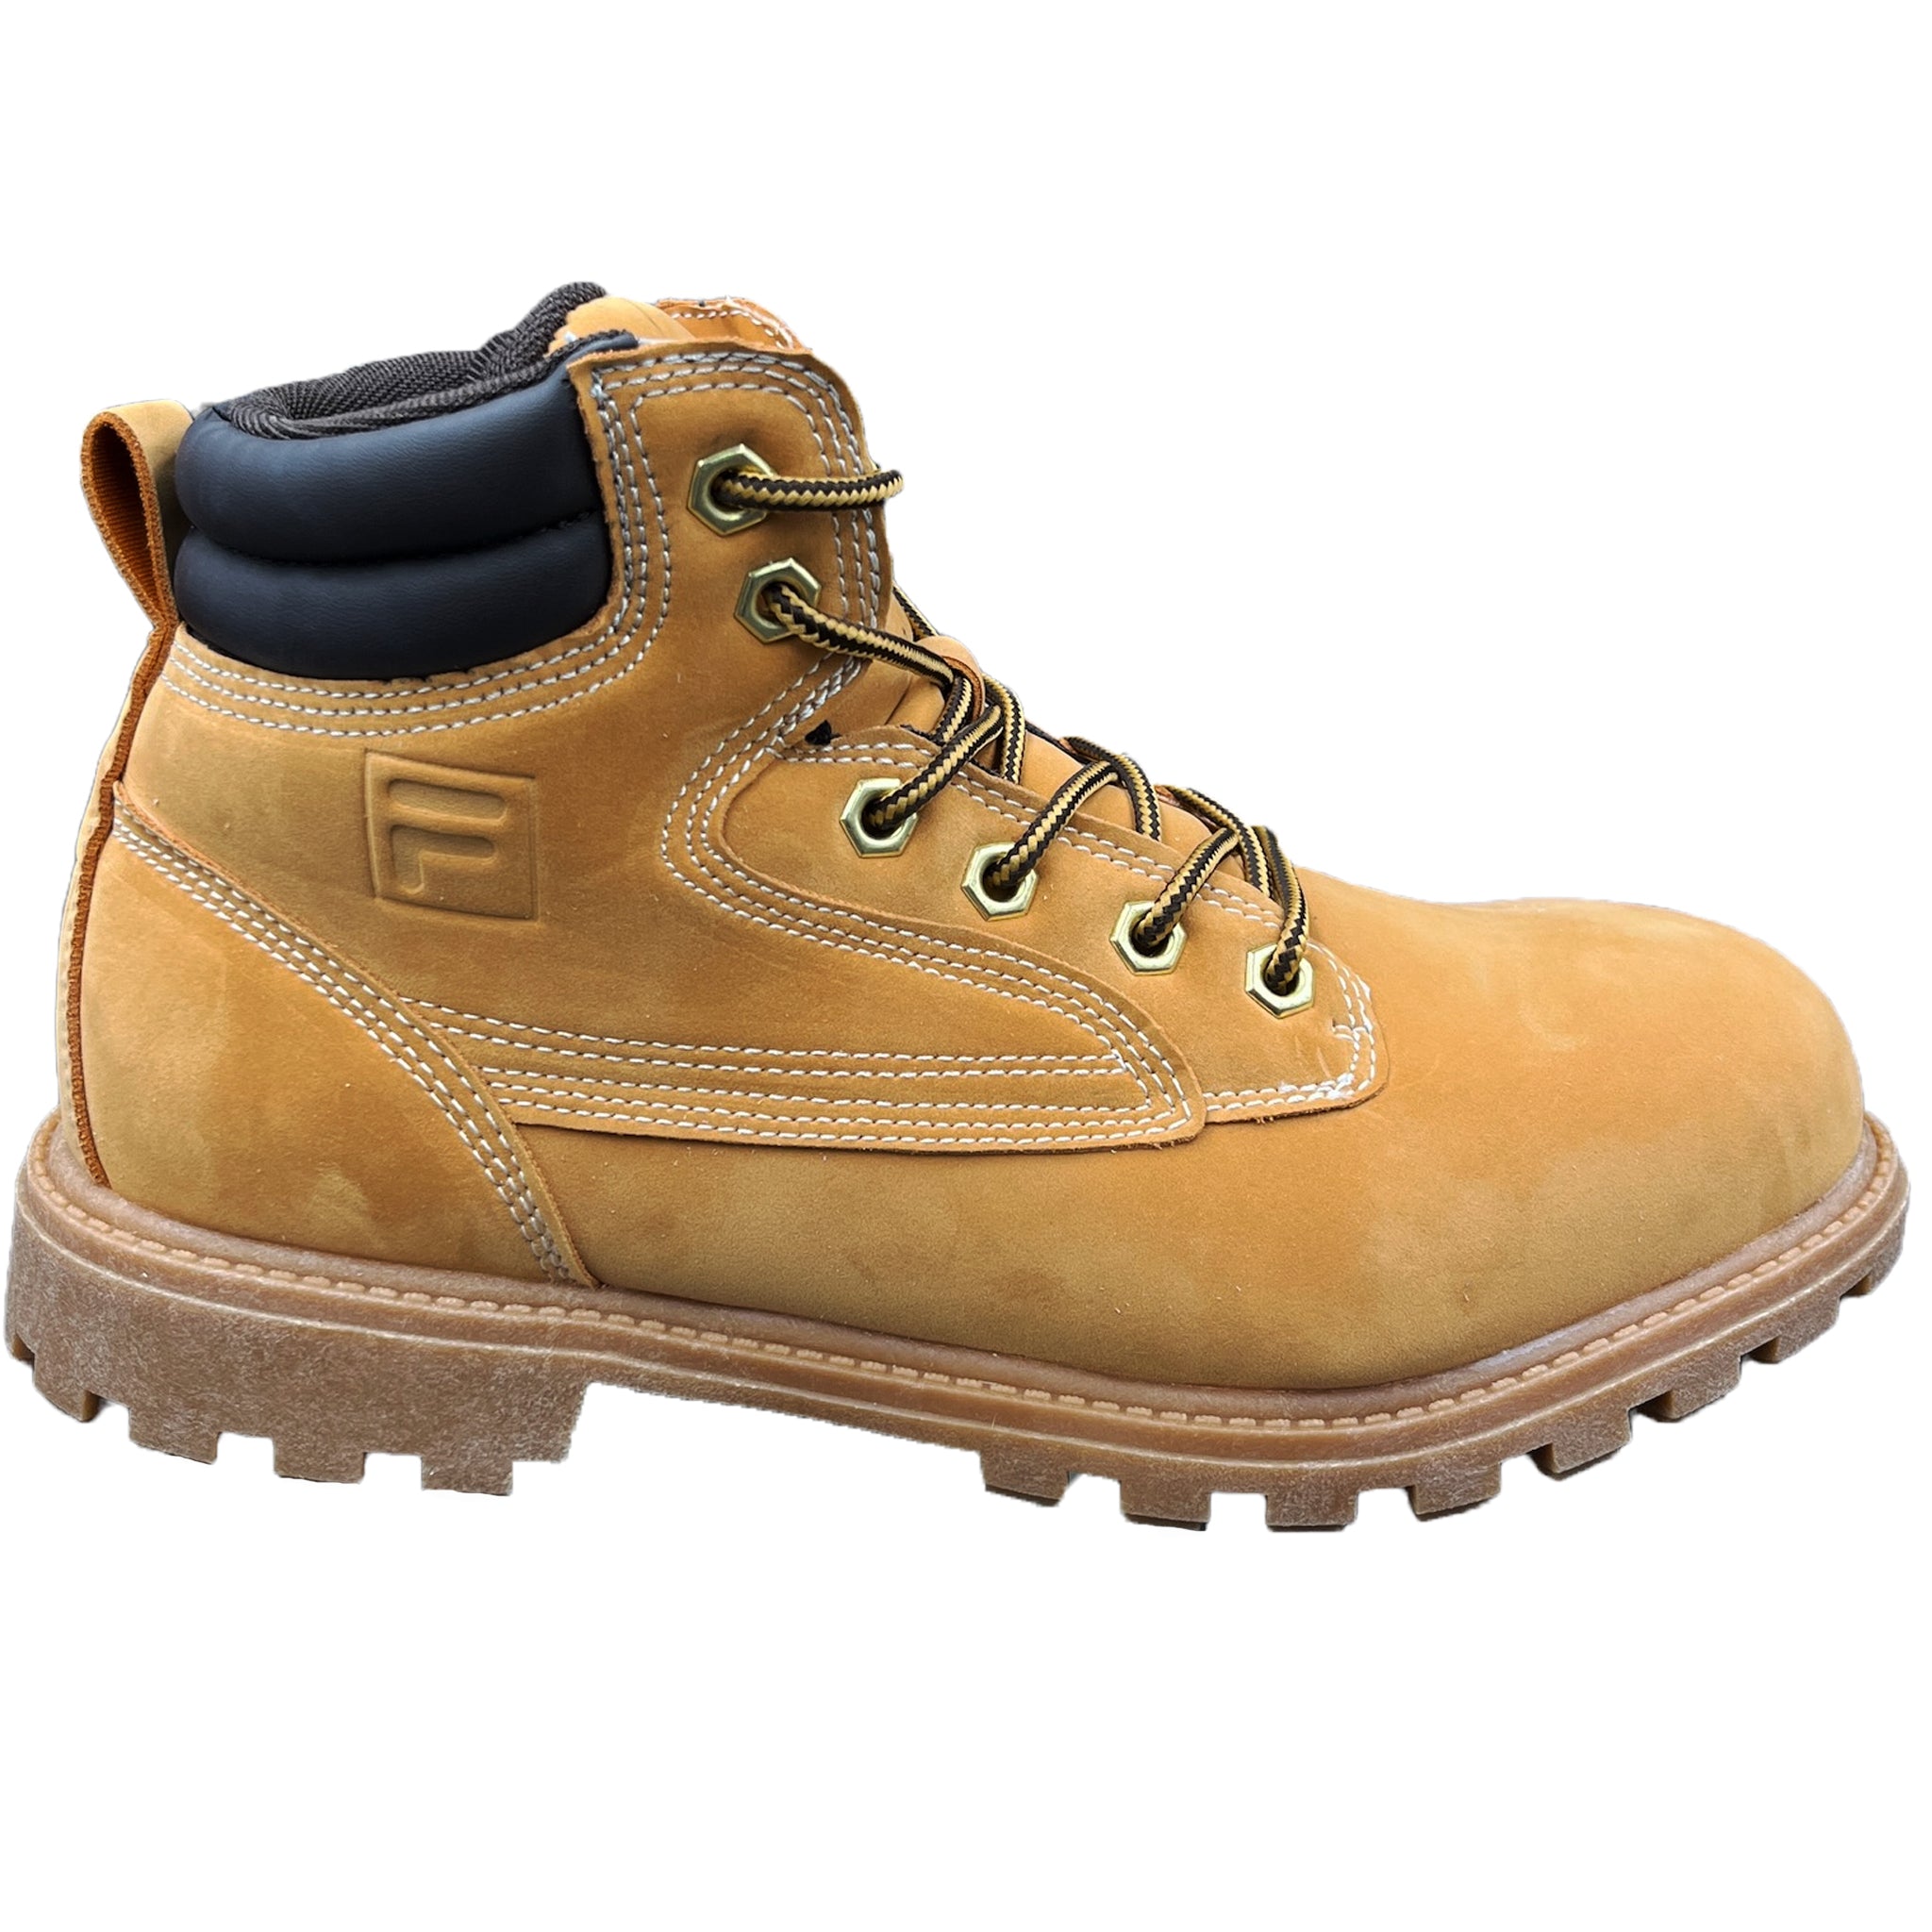 Fila Men's Landing Soft Toe Work Boots – That Shoe Store and